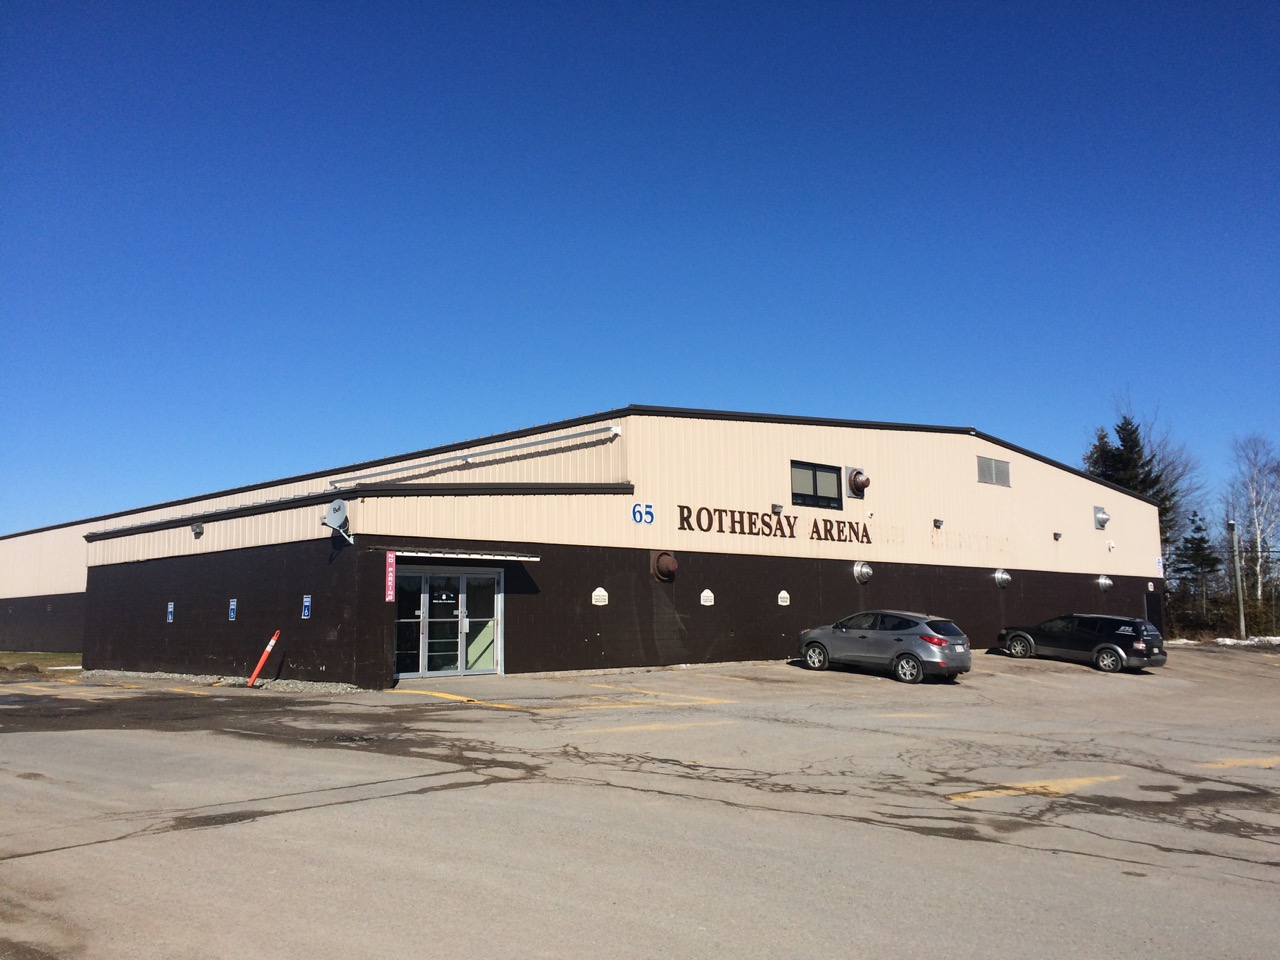 Rothesay Arena / #CanadaDo / Best Things To Do in Rothesay